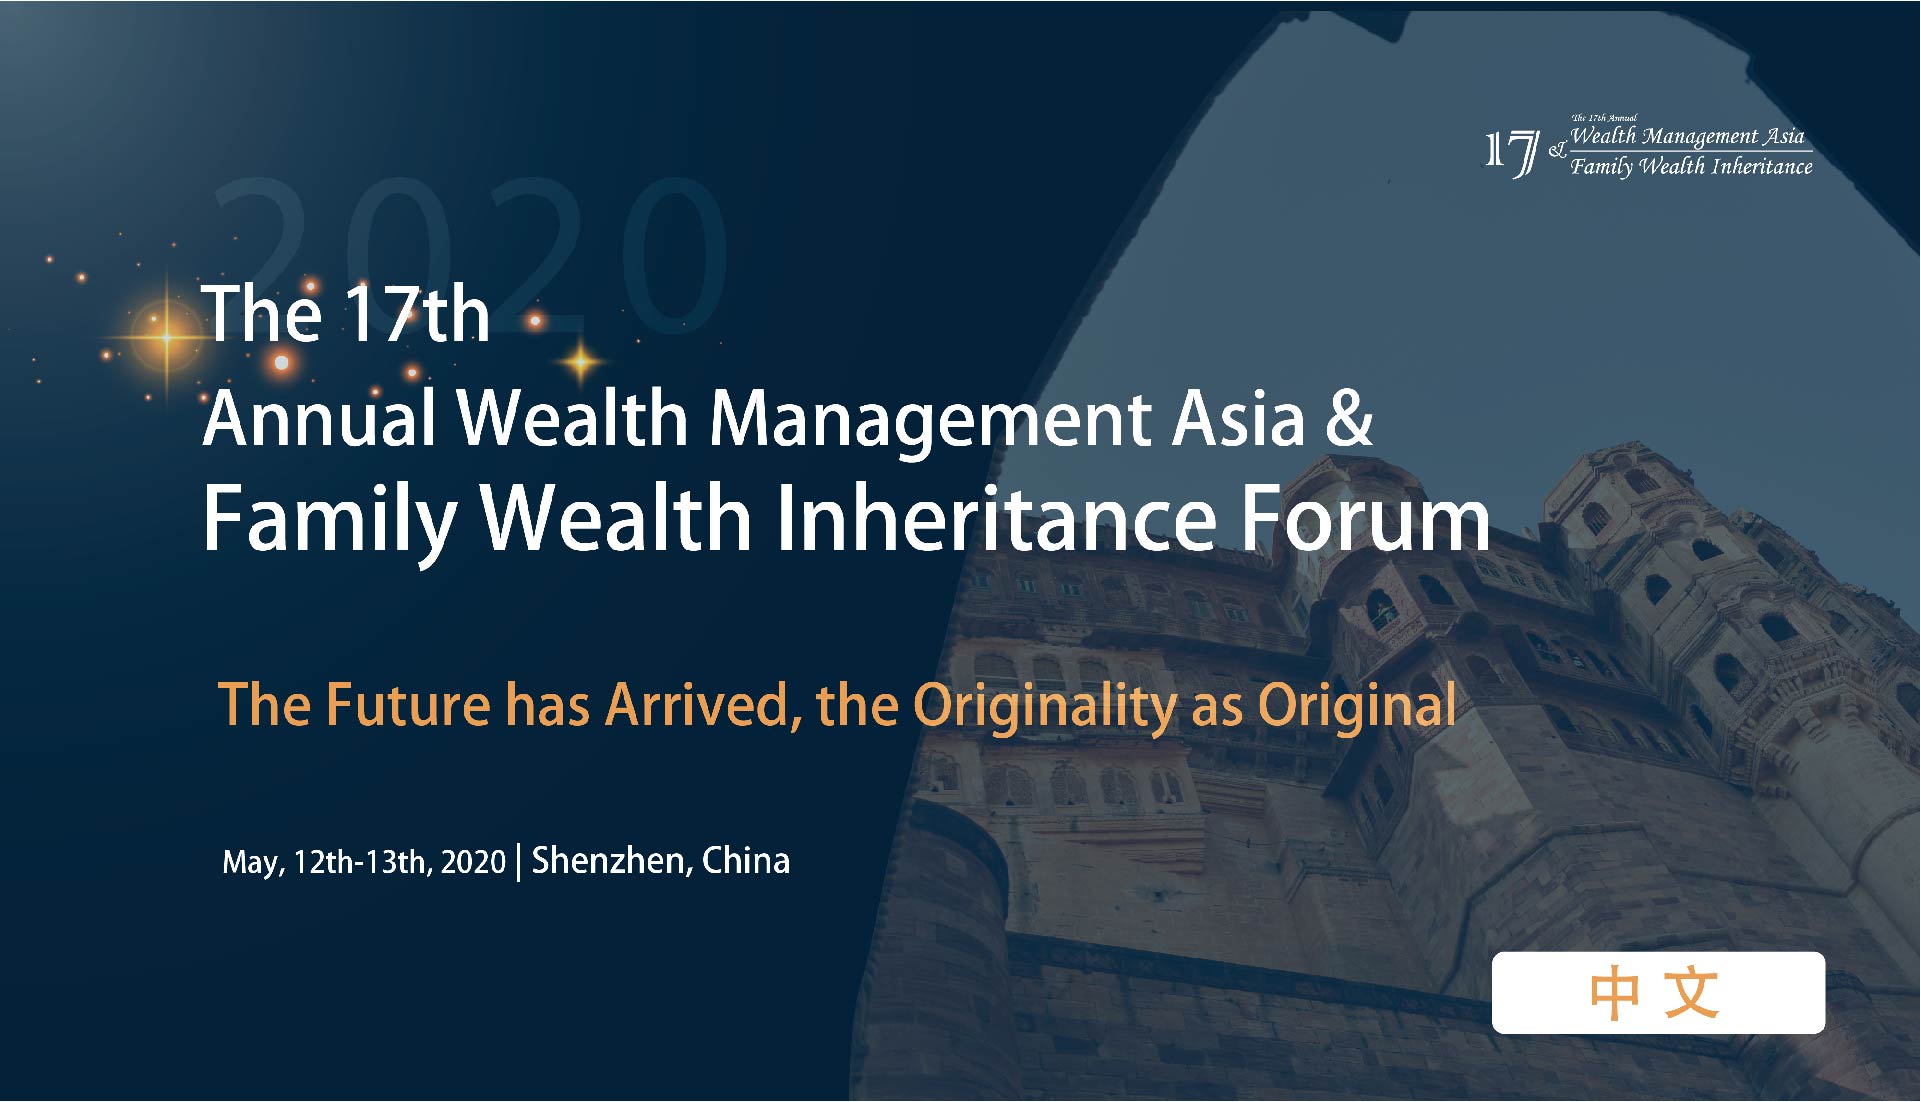 The 17th Annual Wealth Management Asia & Family Wealth Inheritance Forum